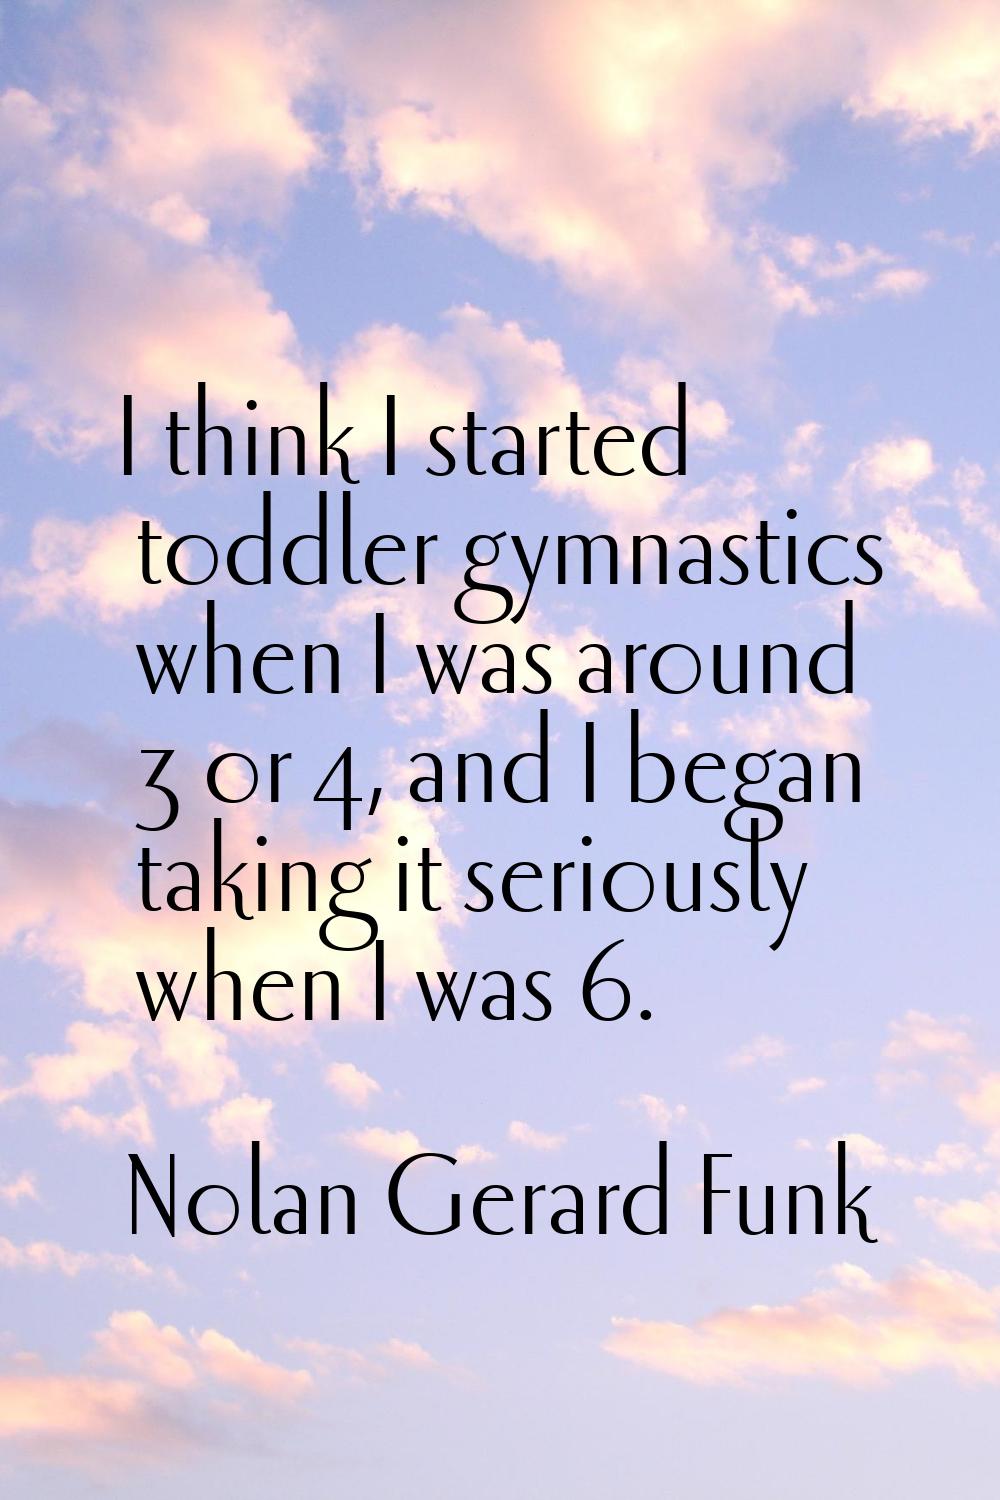 I think I started toddler gymnastics when I was around 3 or 4, and I began taking it seriously when